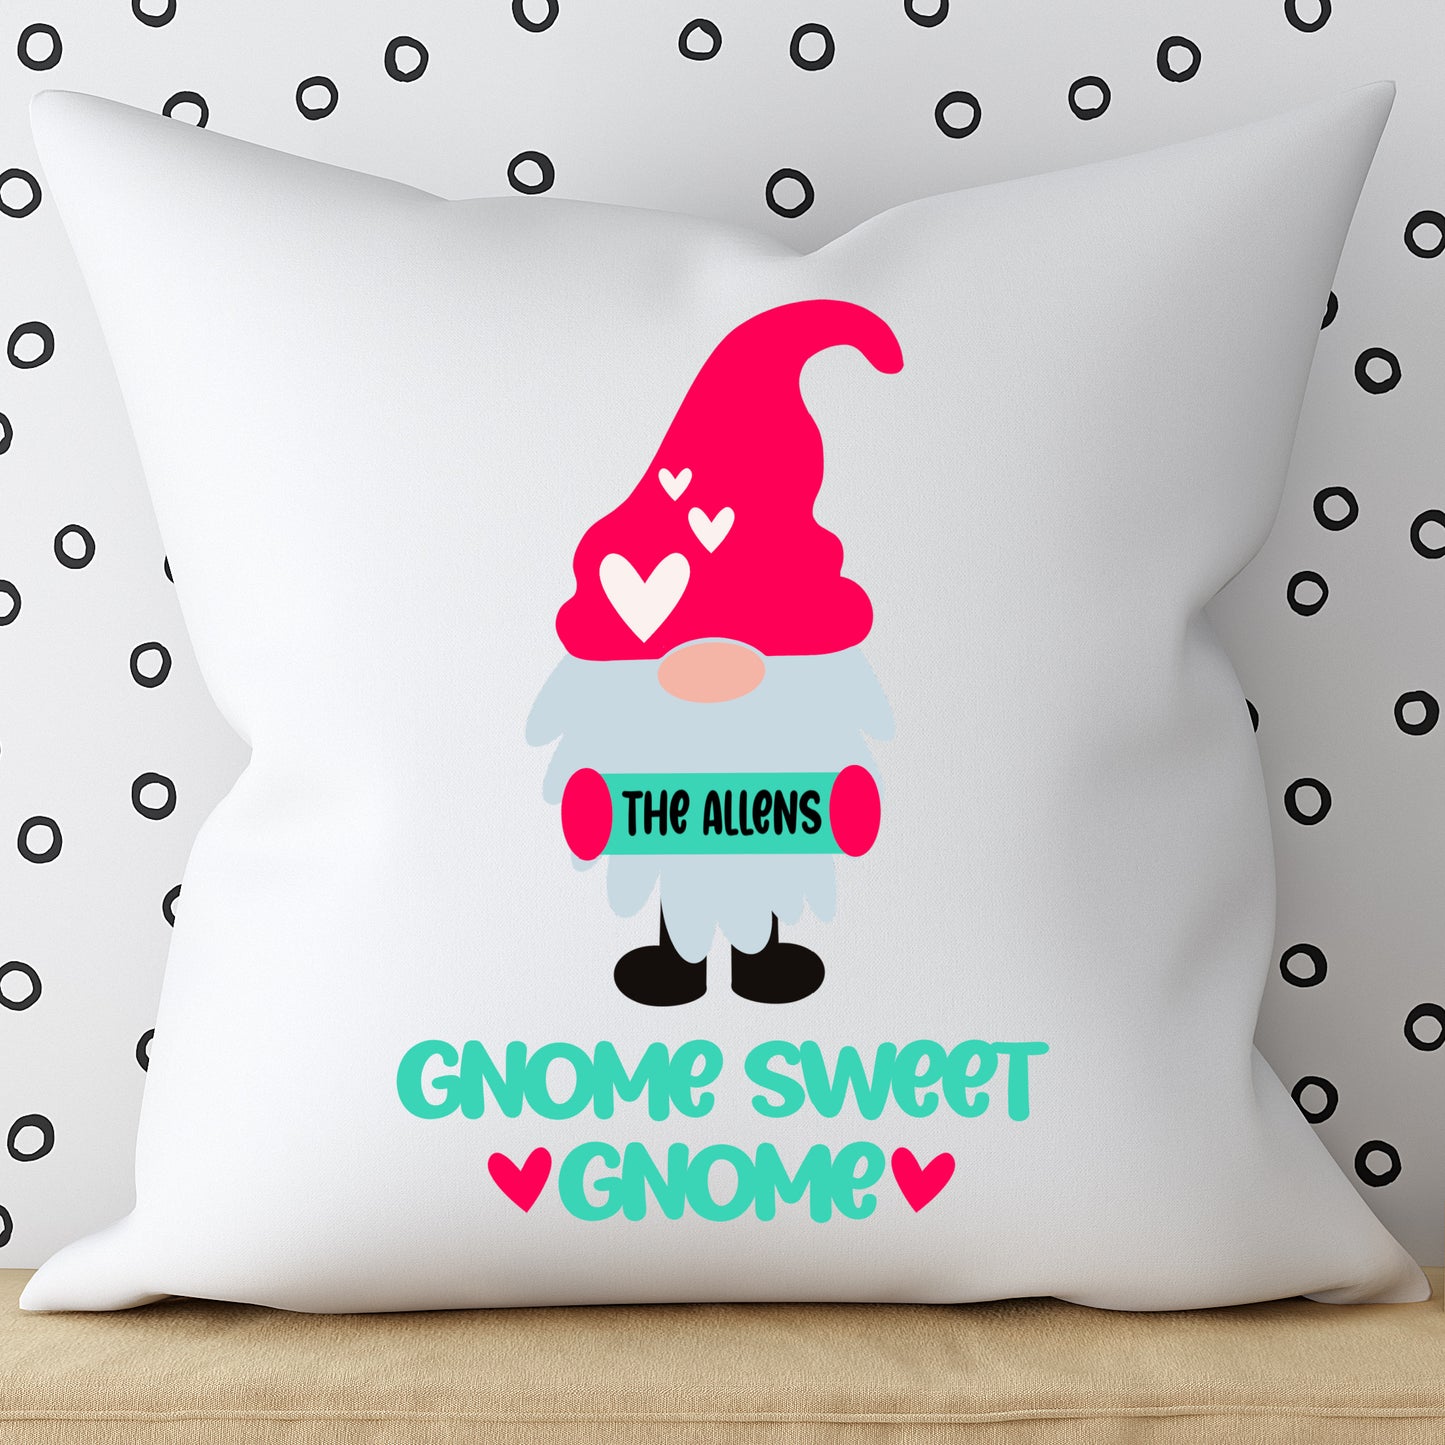 Gnome Sweet Gnome SVG Cut File and PNG